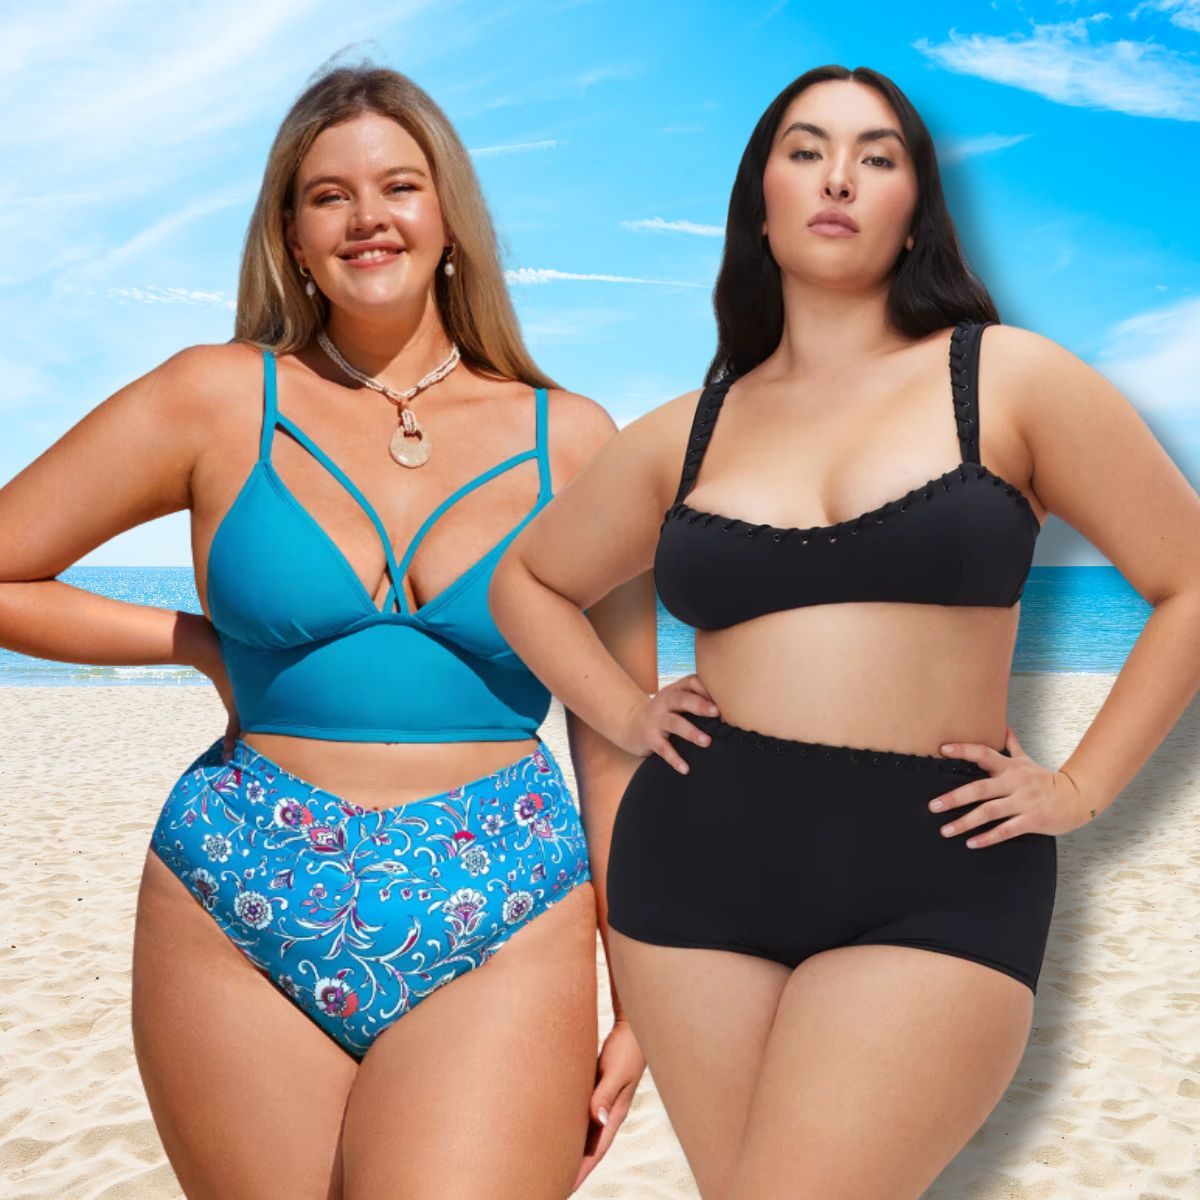 The Best Plus Size Swimwear That’ll Make You Feel Cute & Confident